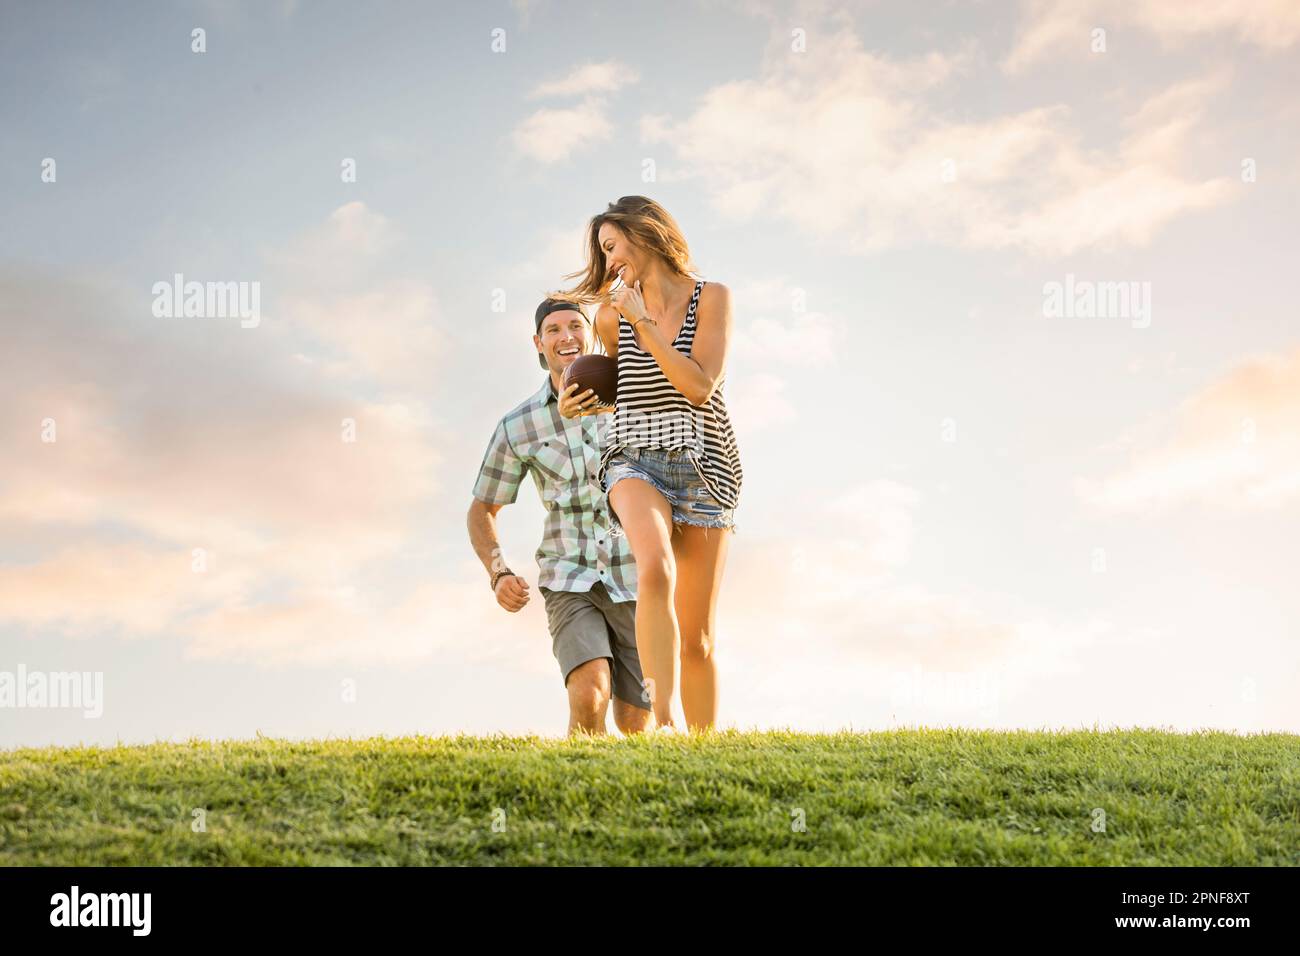 Man running after woman in park Stock Photo